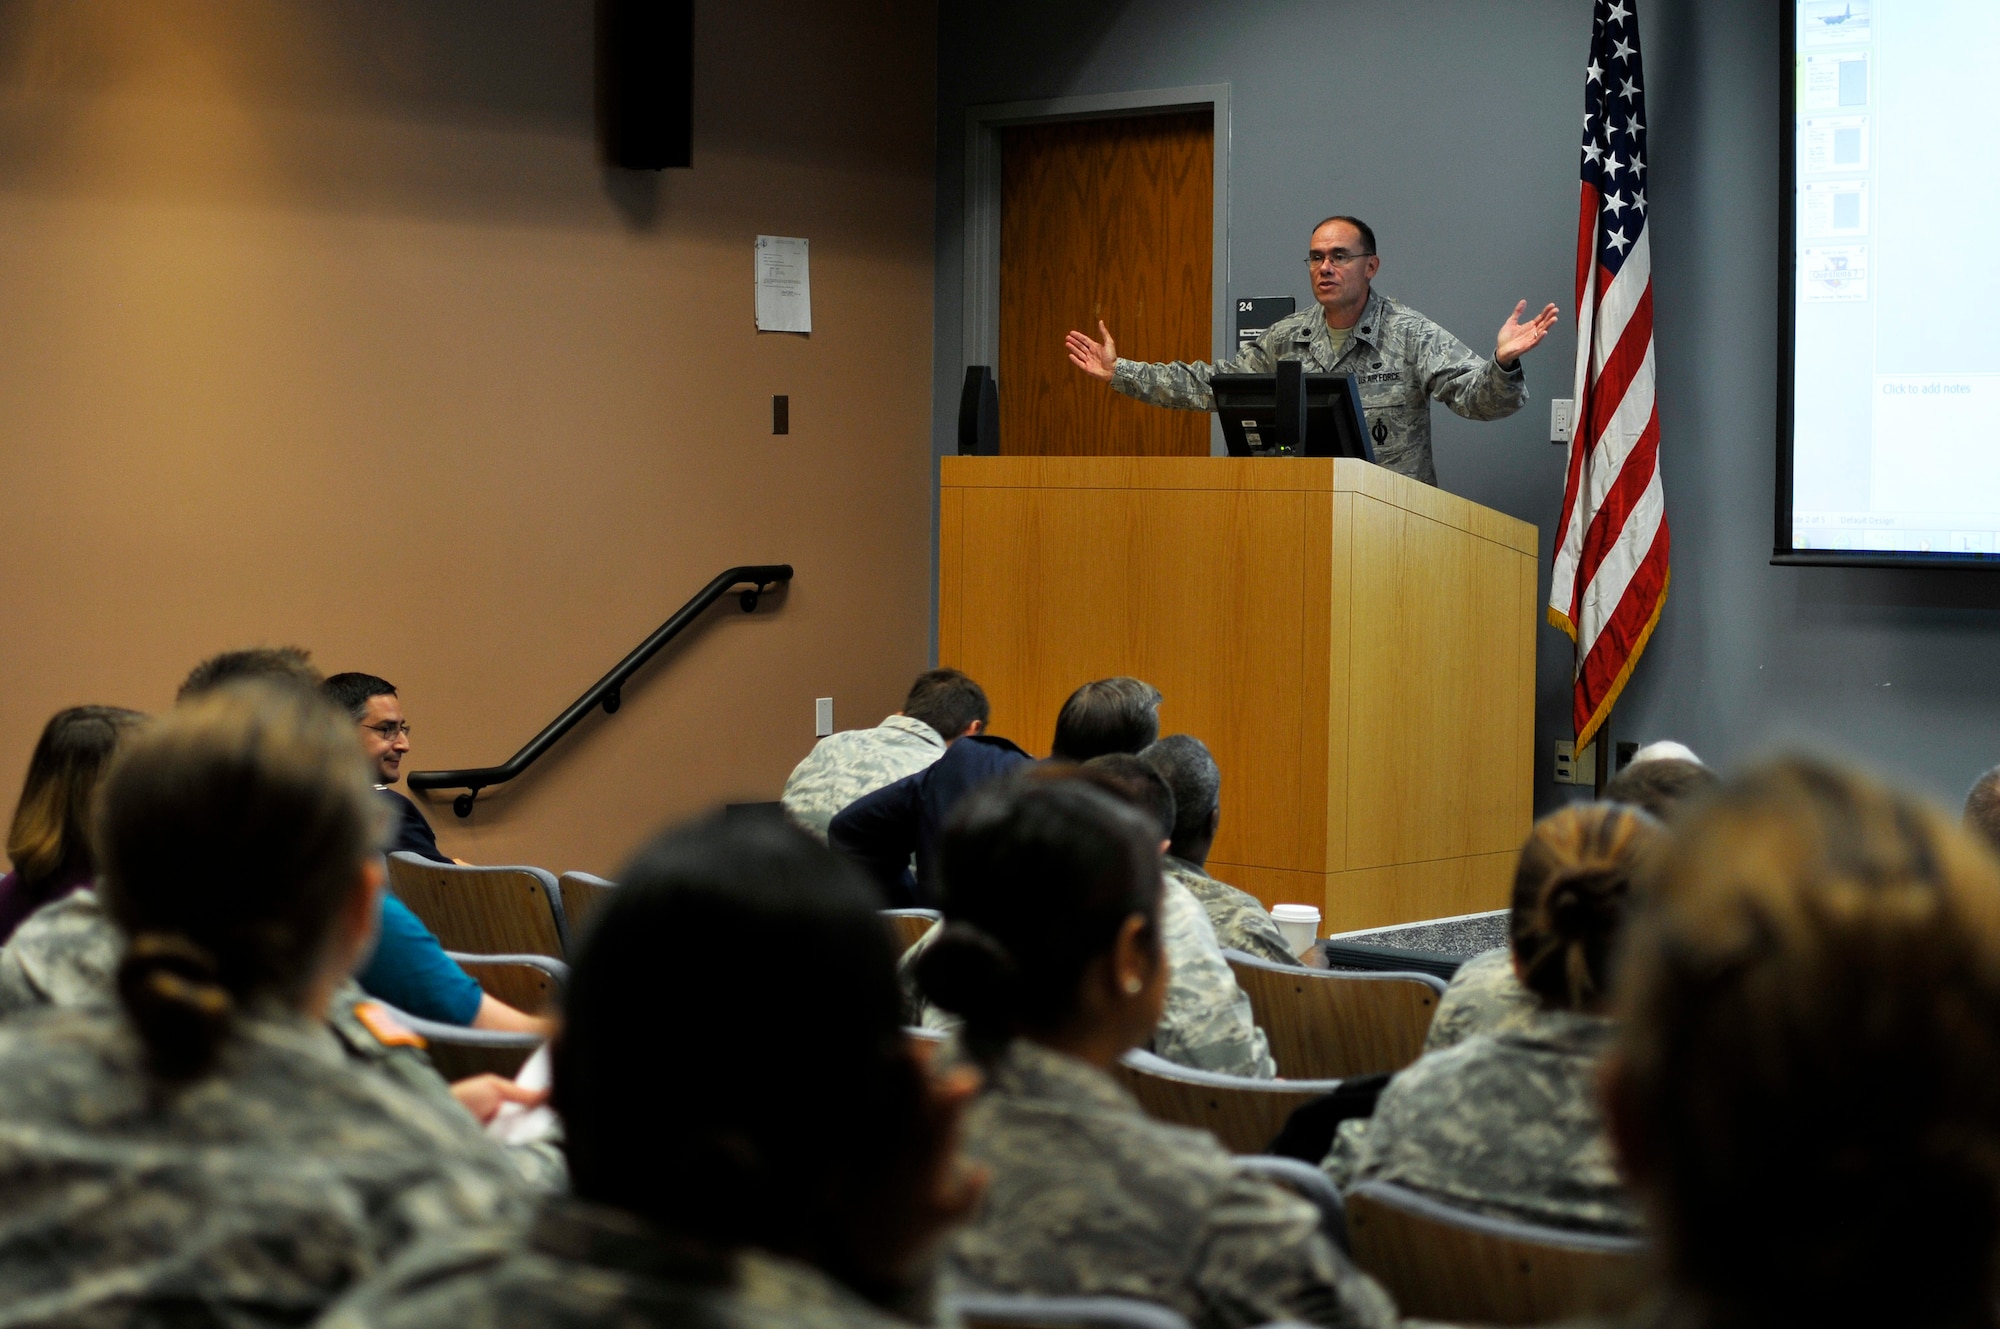 U.S. Air Force Lt. Col. David D. Gorman, judge advocate at the 182nd Airlift Wing, Illinois Air National Guard, speaks to Air and Army National Guard legal professionals during a joint-force training workshop at the 182nd Airlift Wing, Peoria, Ill., Sept. 12, 2015. The Judge Advocate General Corps provides professional counsel and a full spectrum of legal capabilities to Airmen. (U.S. Air National Guard photo by Staff Sgt. Lealan Buehrer/Released)